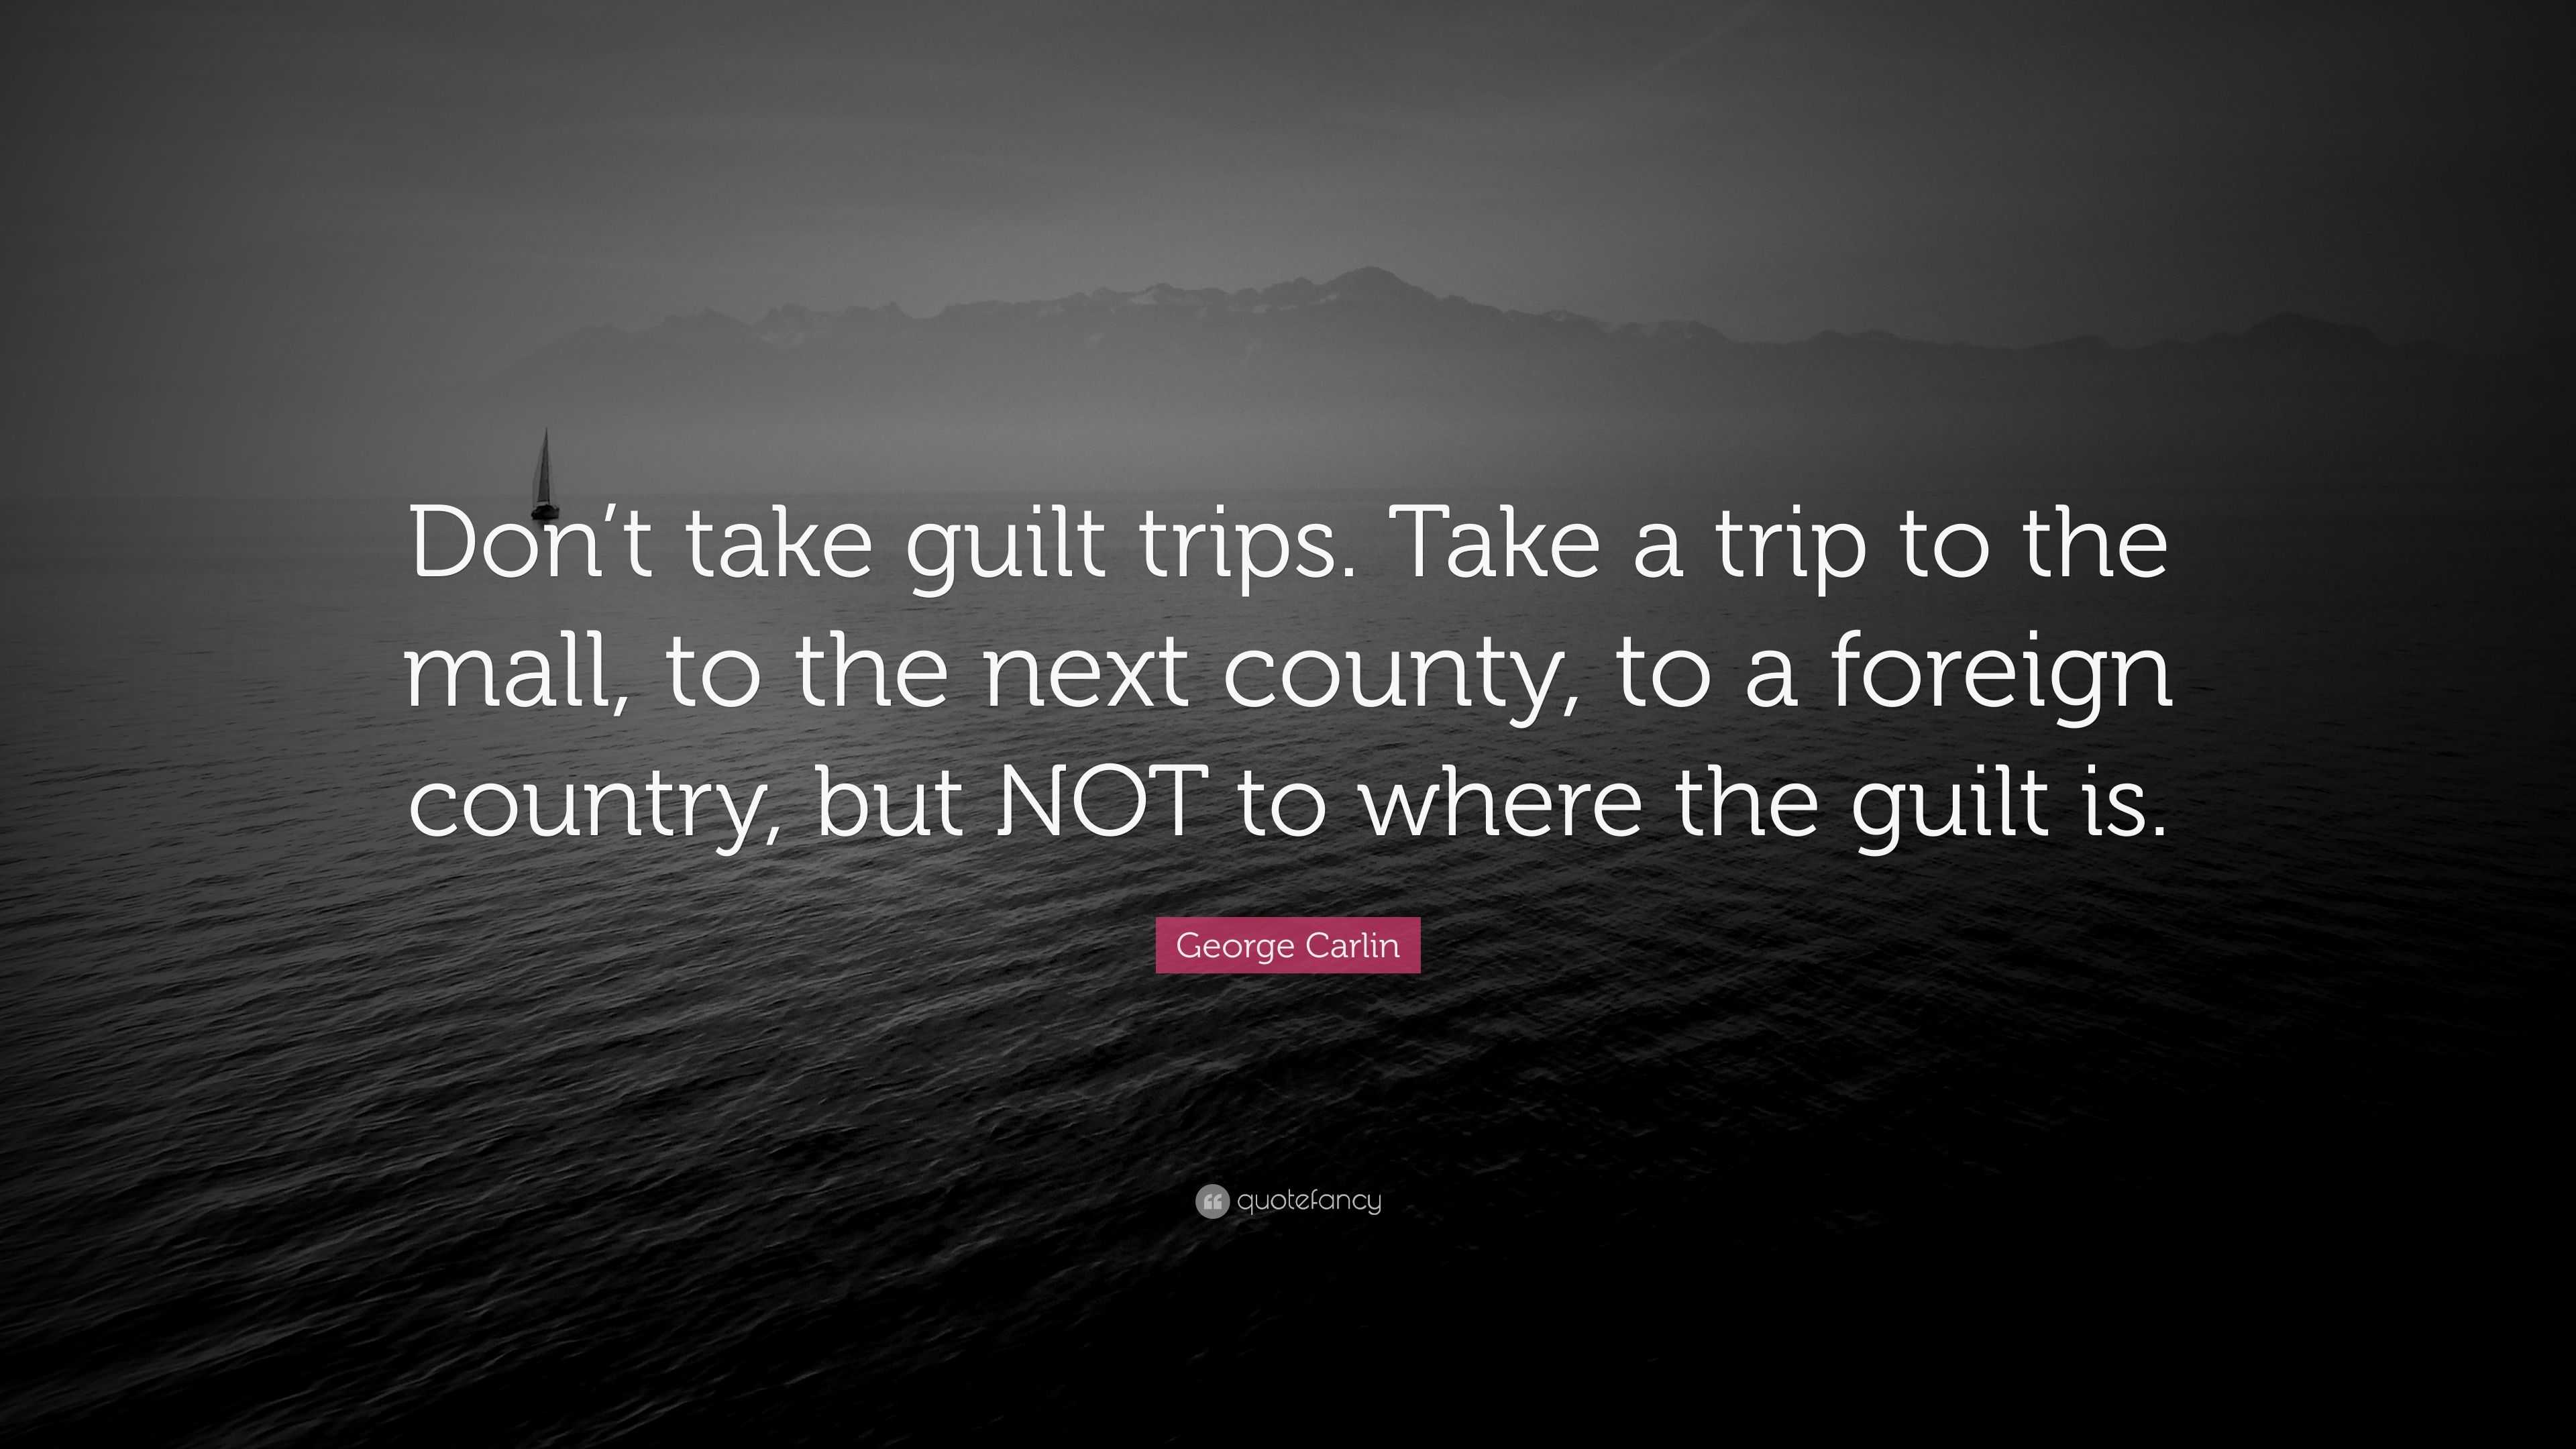 quotes on guilt trip